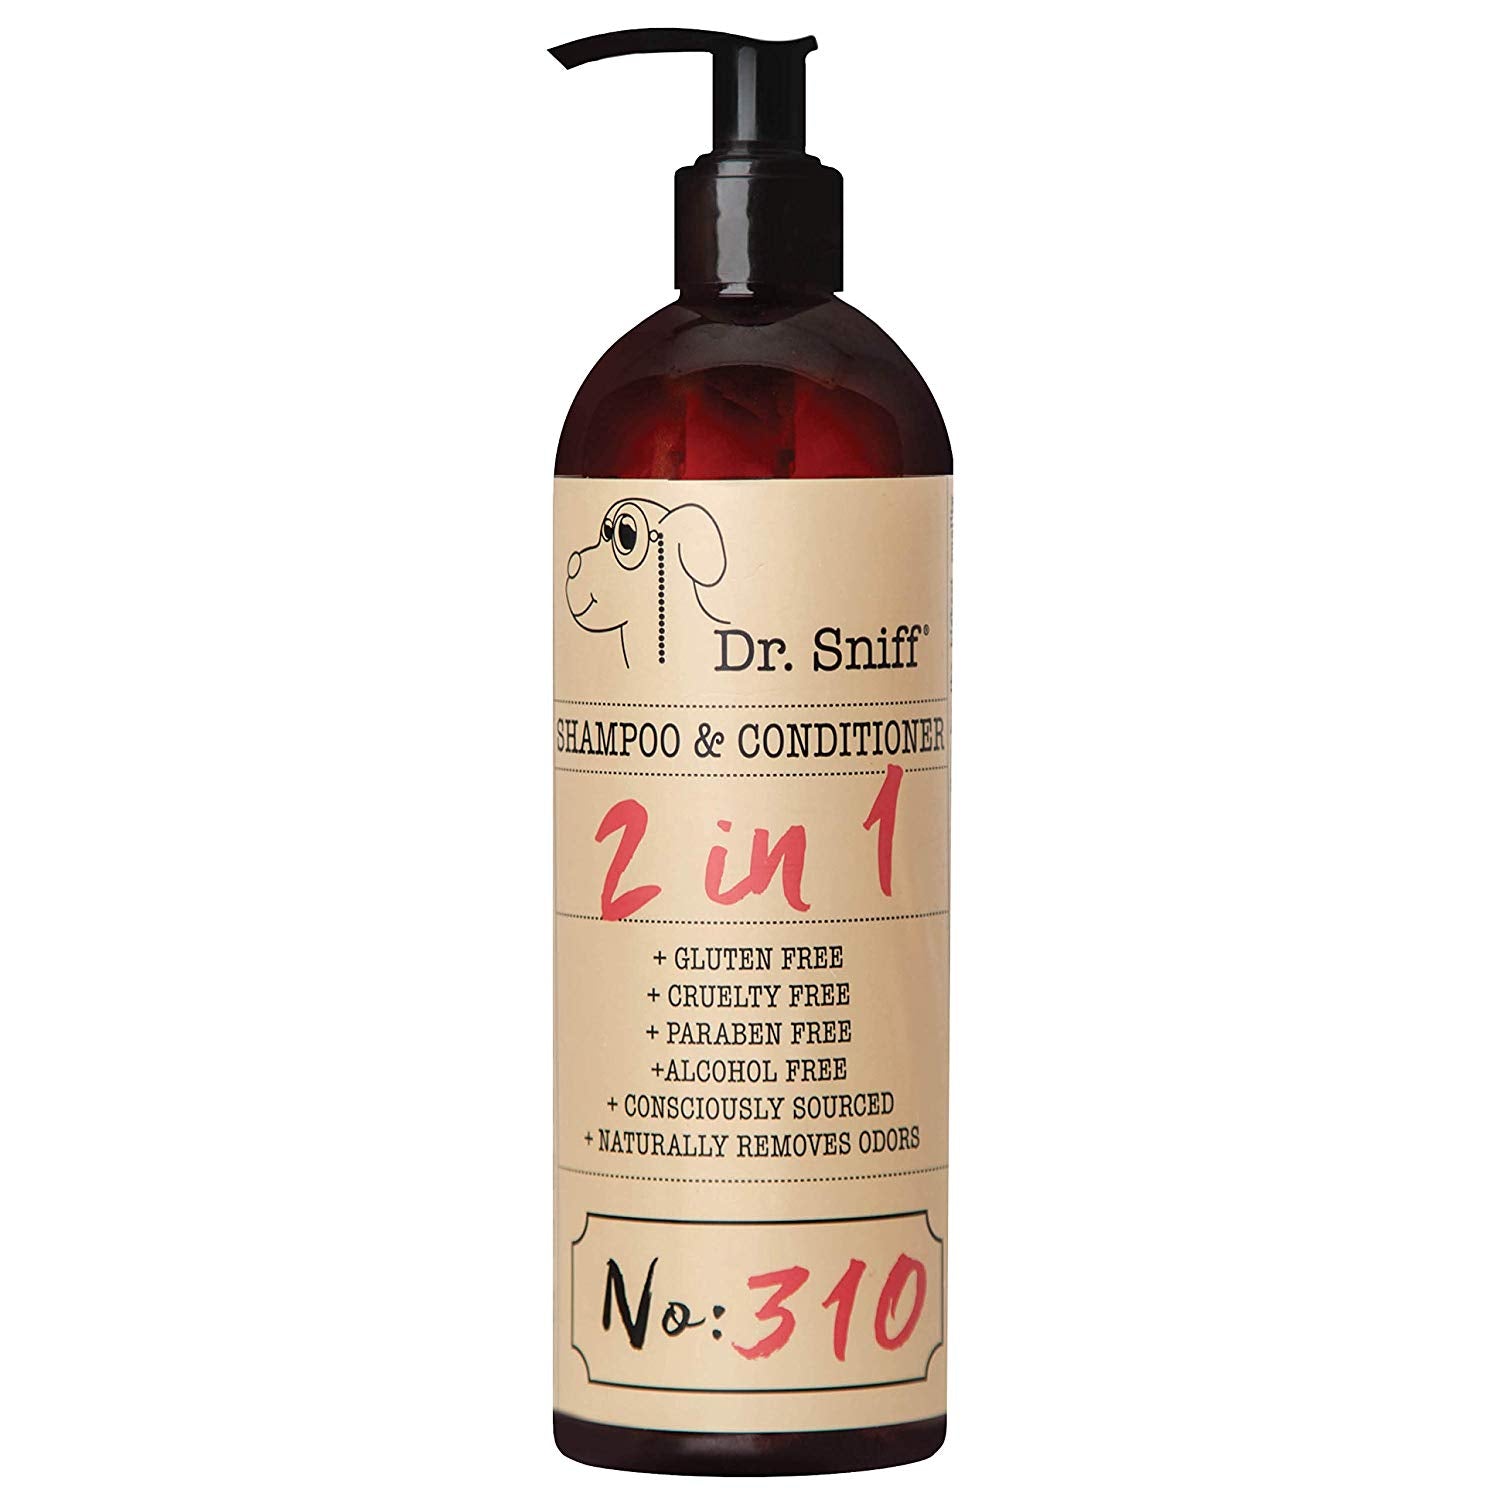 Pet Boutique - Dog Grooming - Bath and Body - Sweet Pup 2-in-1 Dog Shampoo & Conditioner by Dr. Sniff